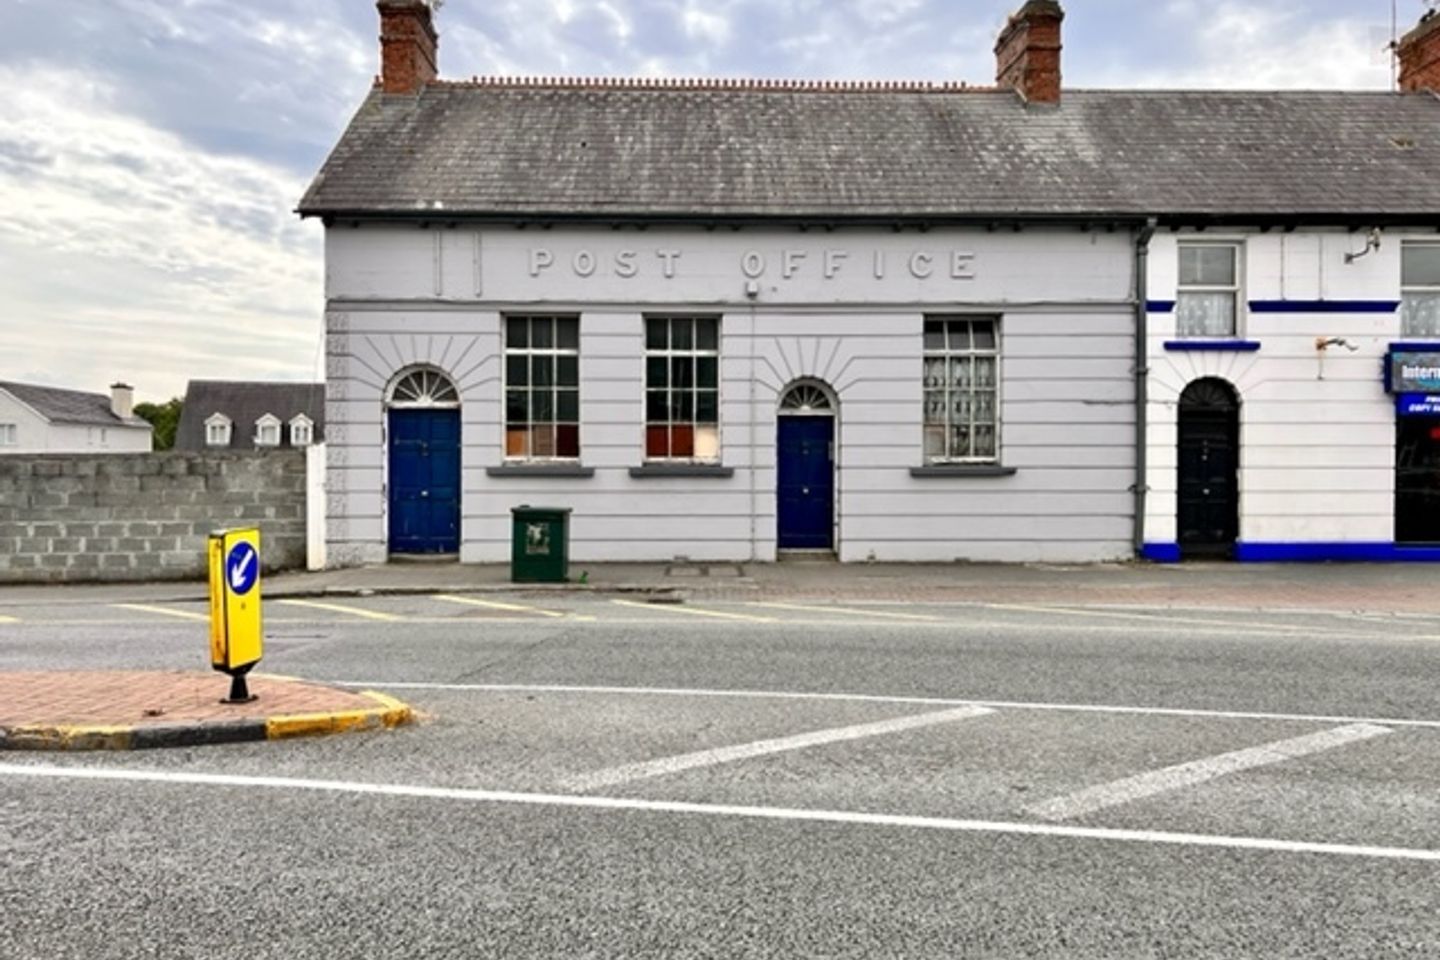 Old Post Office, Main Street, Moate, Co. Westmeath